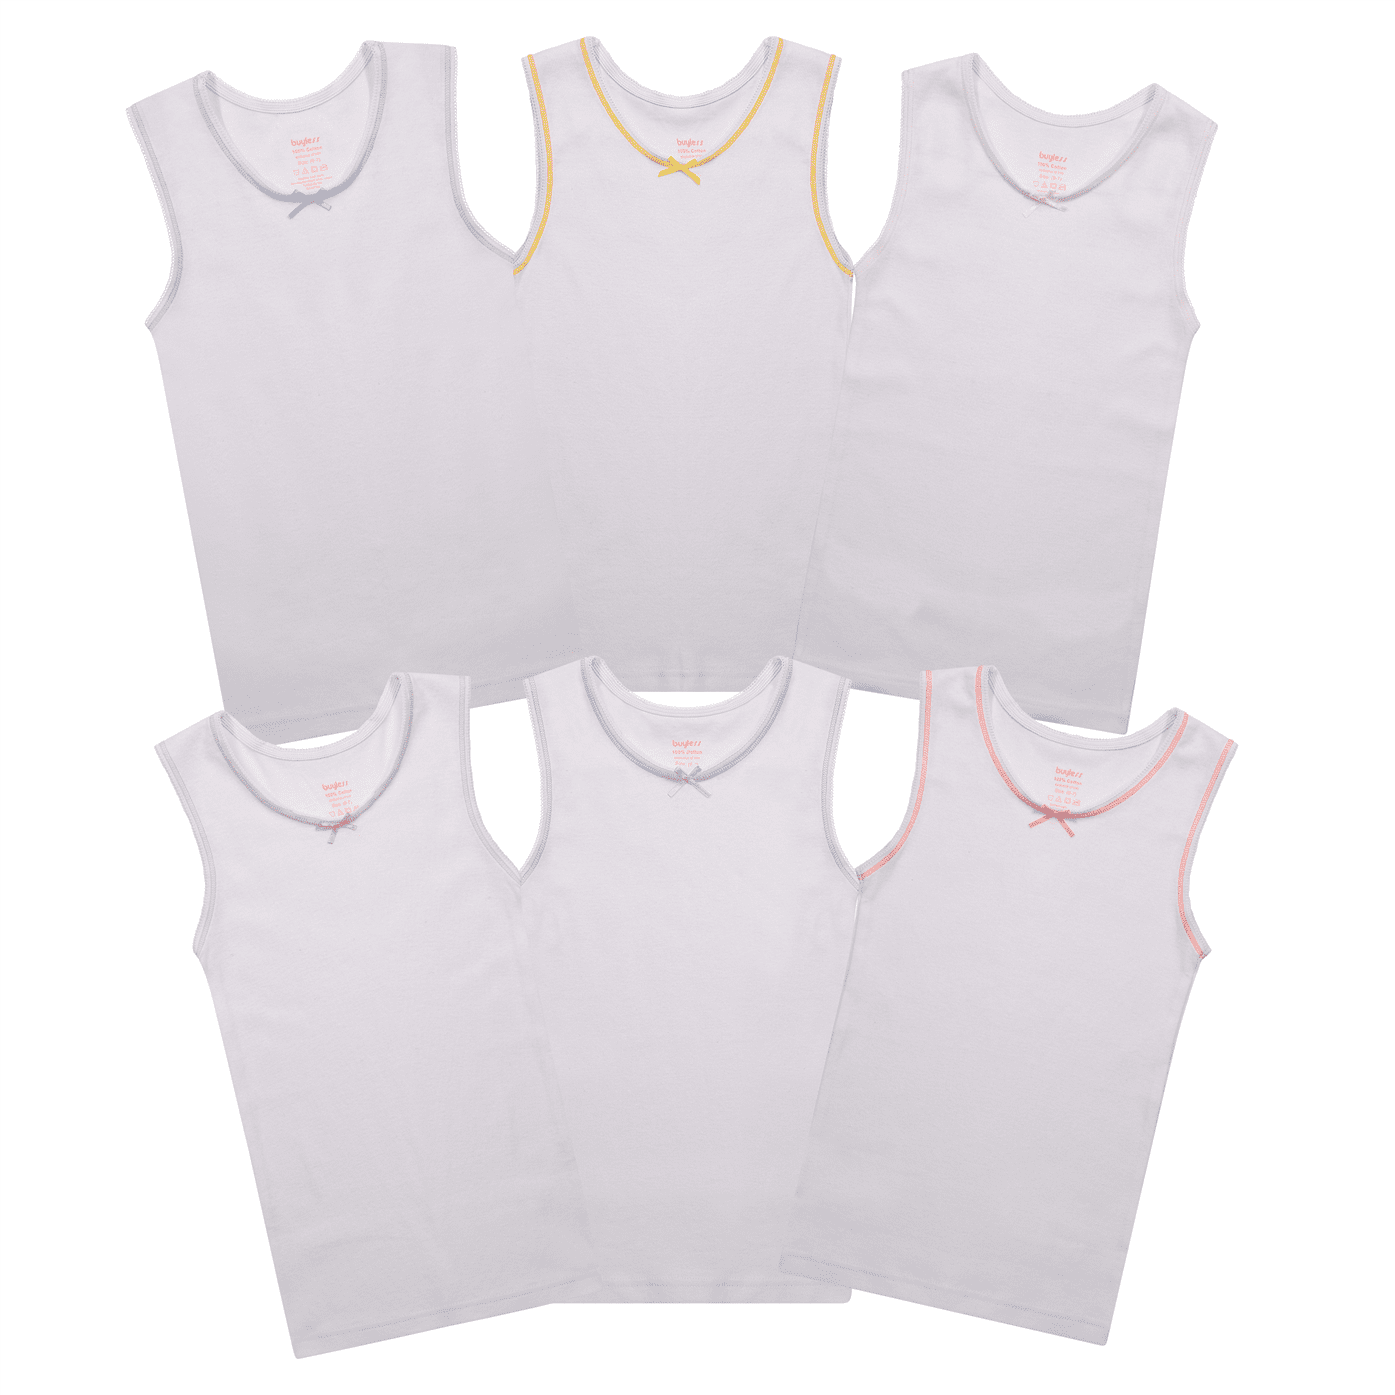 Buyless Fashion Girls Tagless Cami Scoop Neck Undershirts Cotton Tank with Trim and Strap 6 Pack 